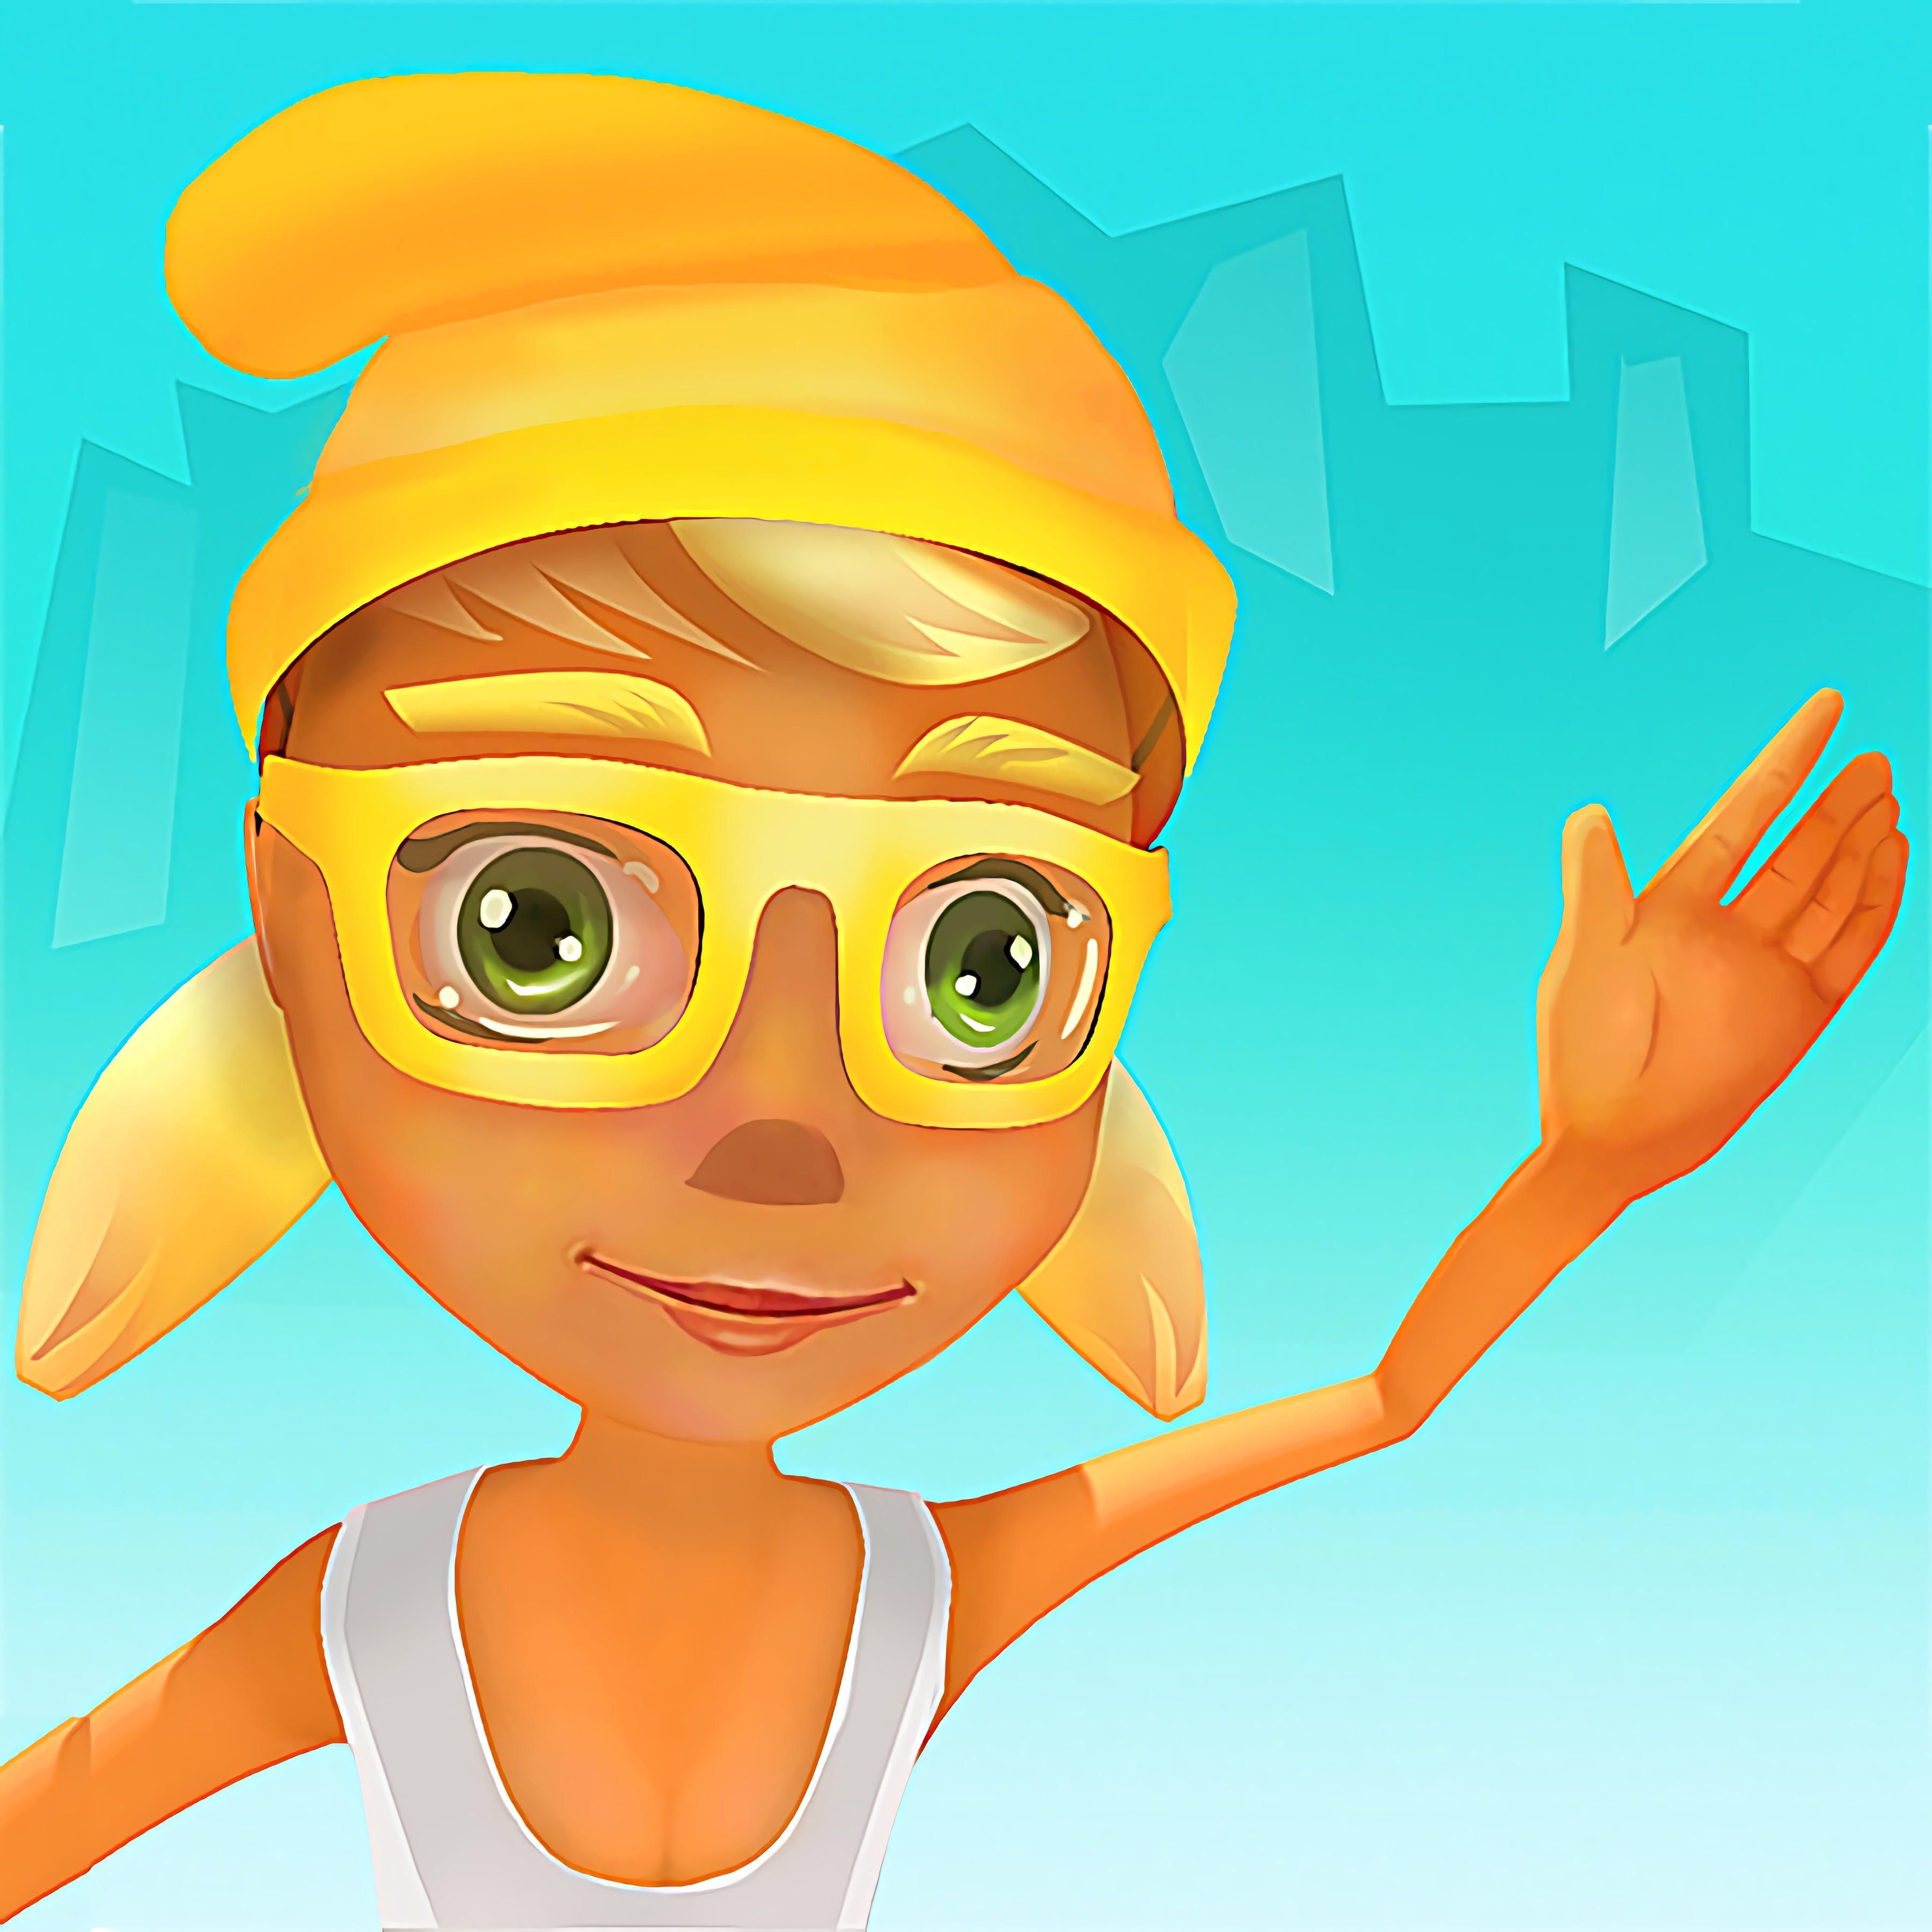 Play Subway Surfers New Orleans game free online